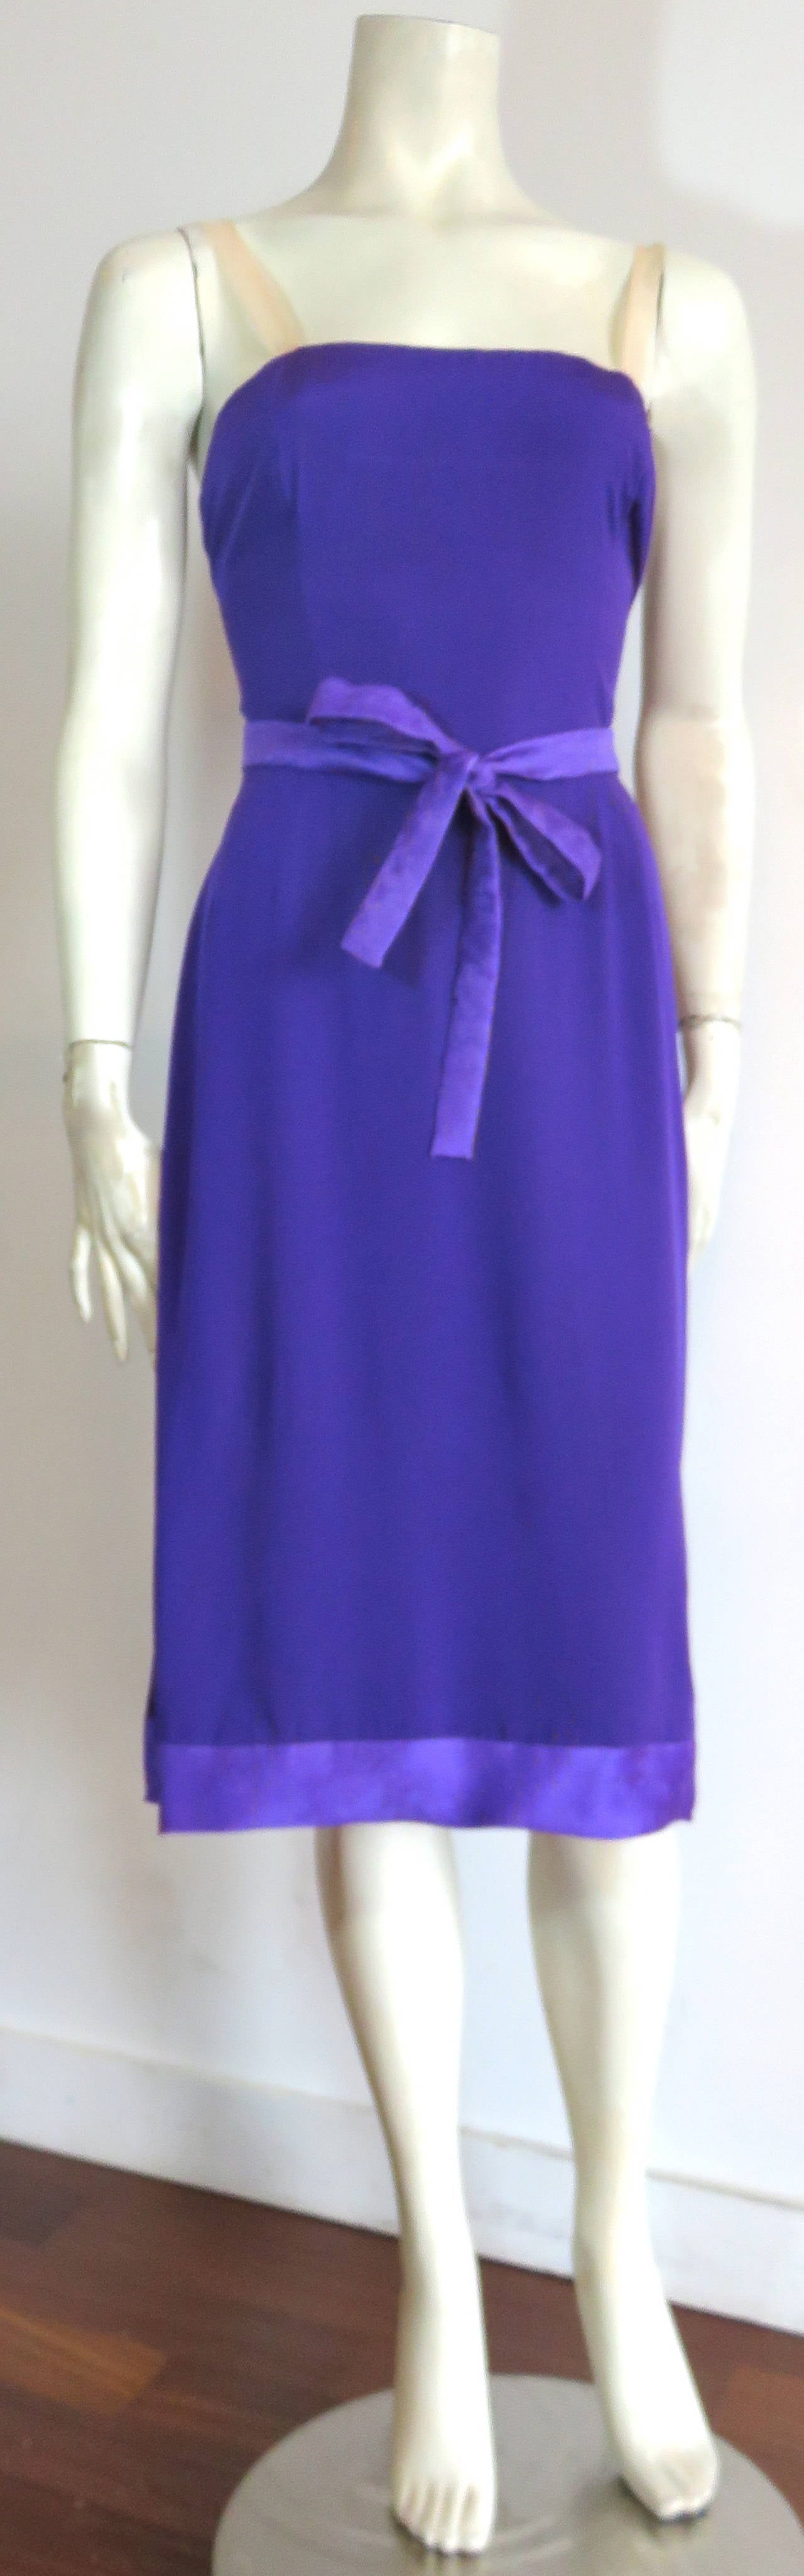 Excellent condition, 1960's BALENCIAGA, haute-couture, purple silk slip dress with floral jacquard trim.

Simple silk, slip dress style with floral jacquard waist sash, and bottom hem, contrast panel.

The shoulder straps are made of sheer,